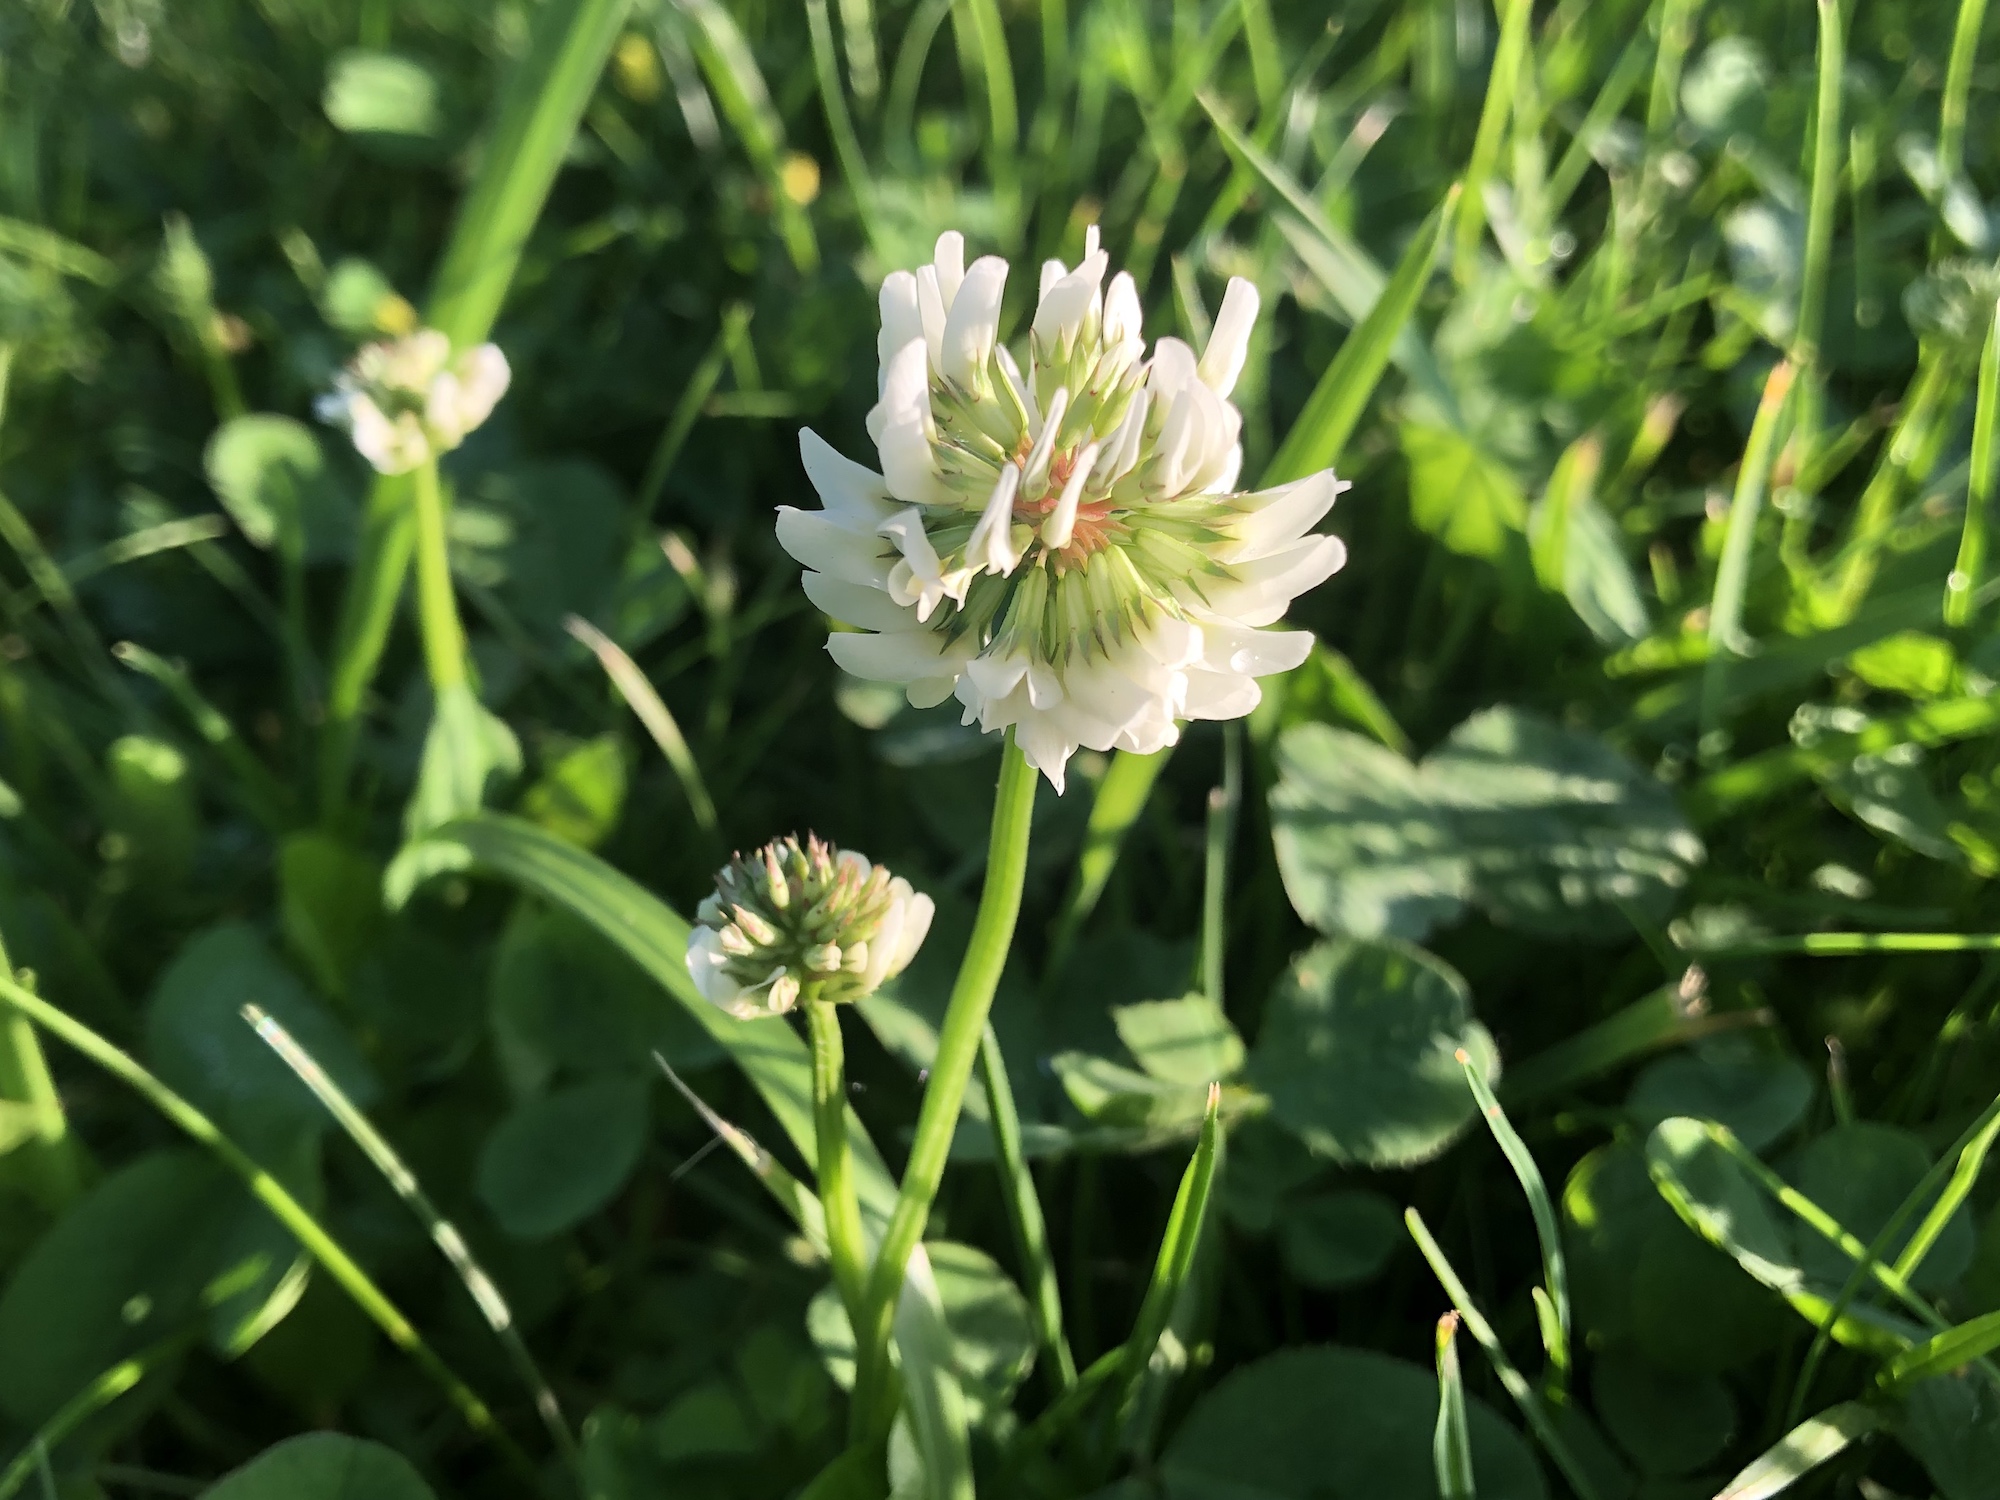 White Clover off of Monroe Street sidewalk in Madison, Wisconsin on May 29, 2020.